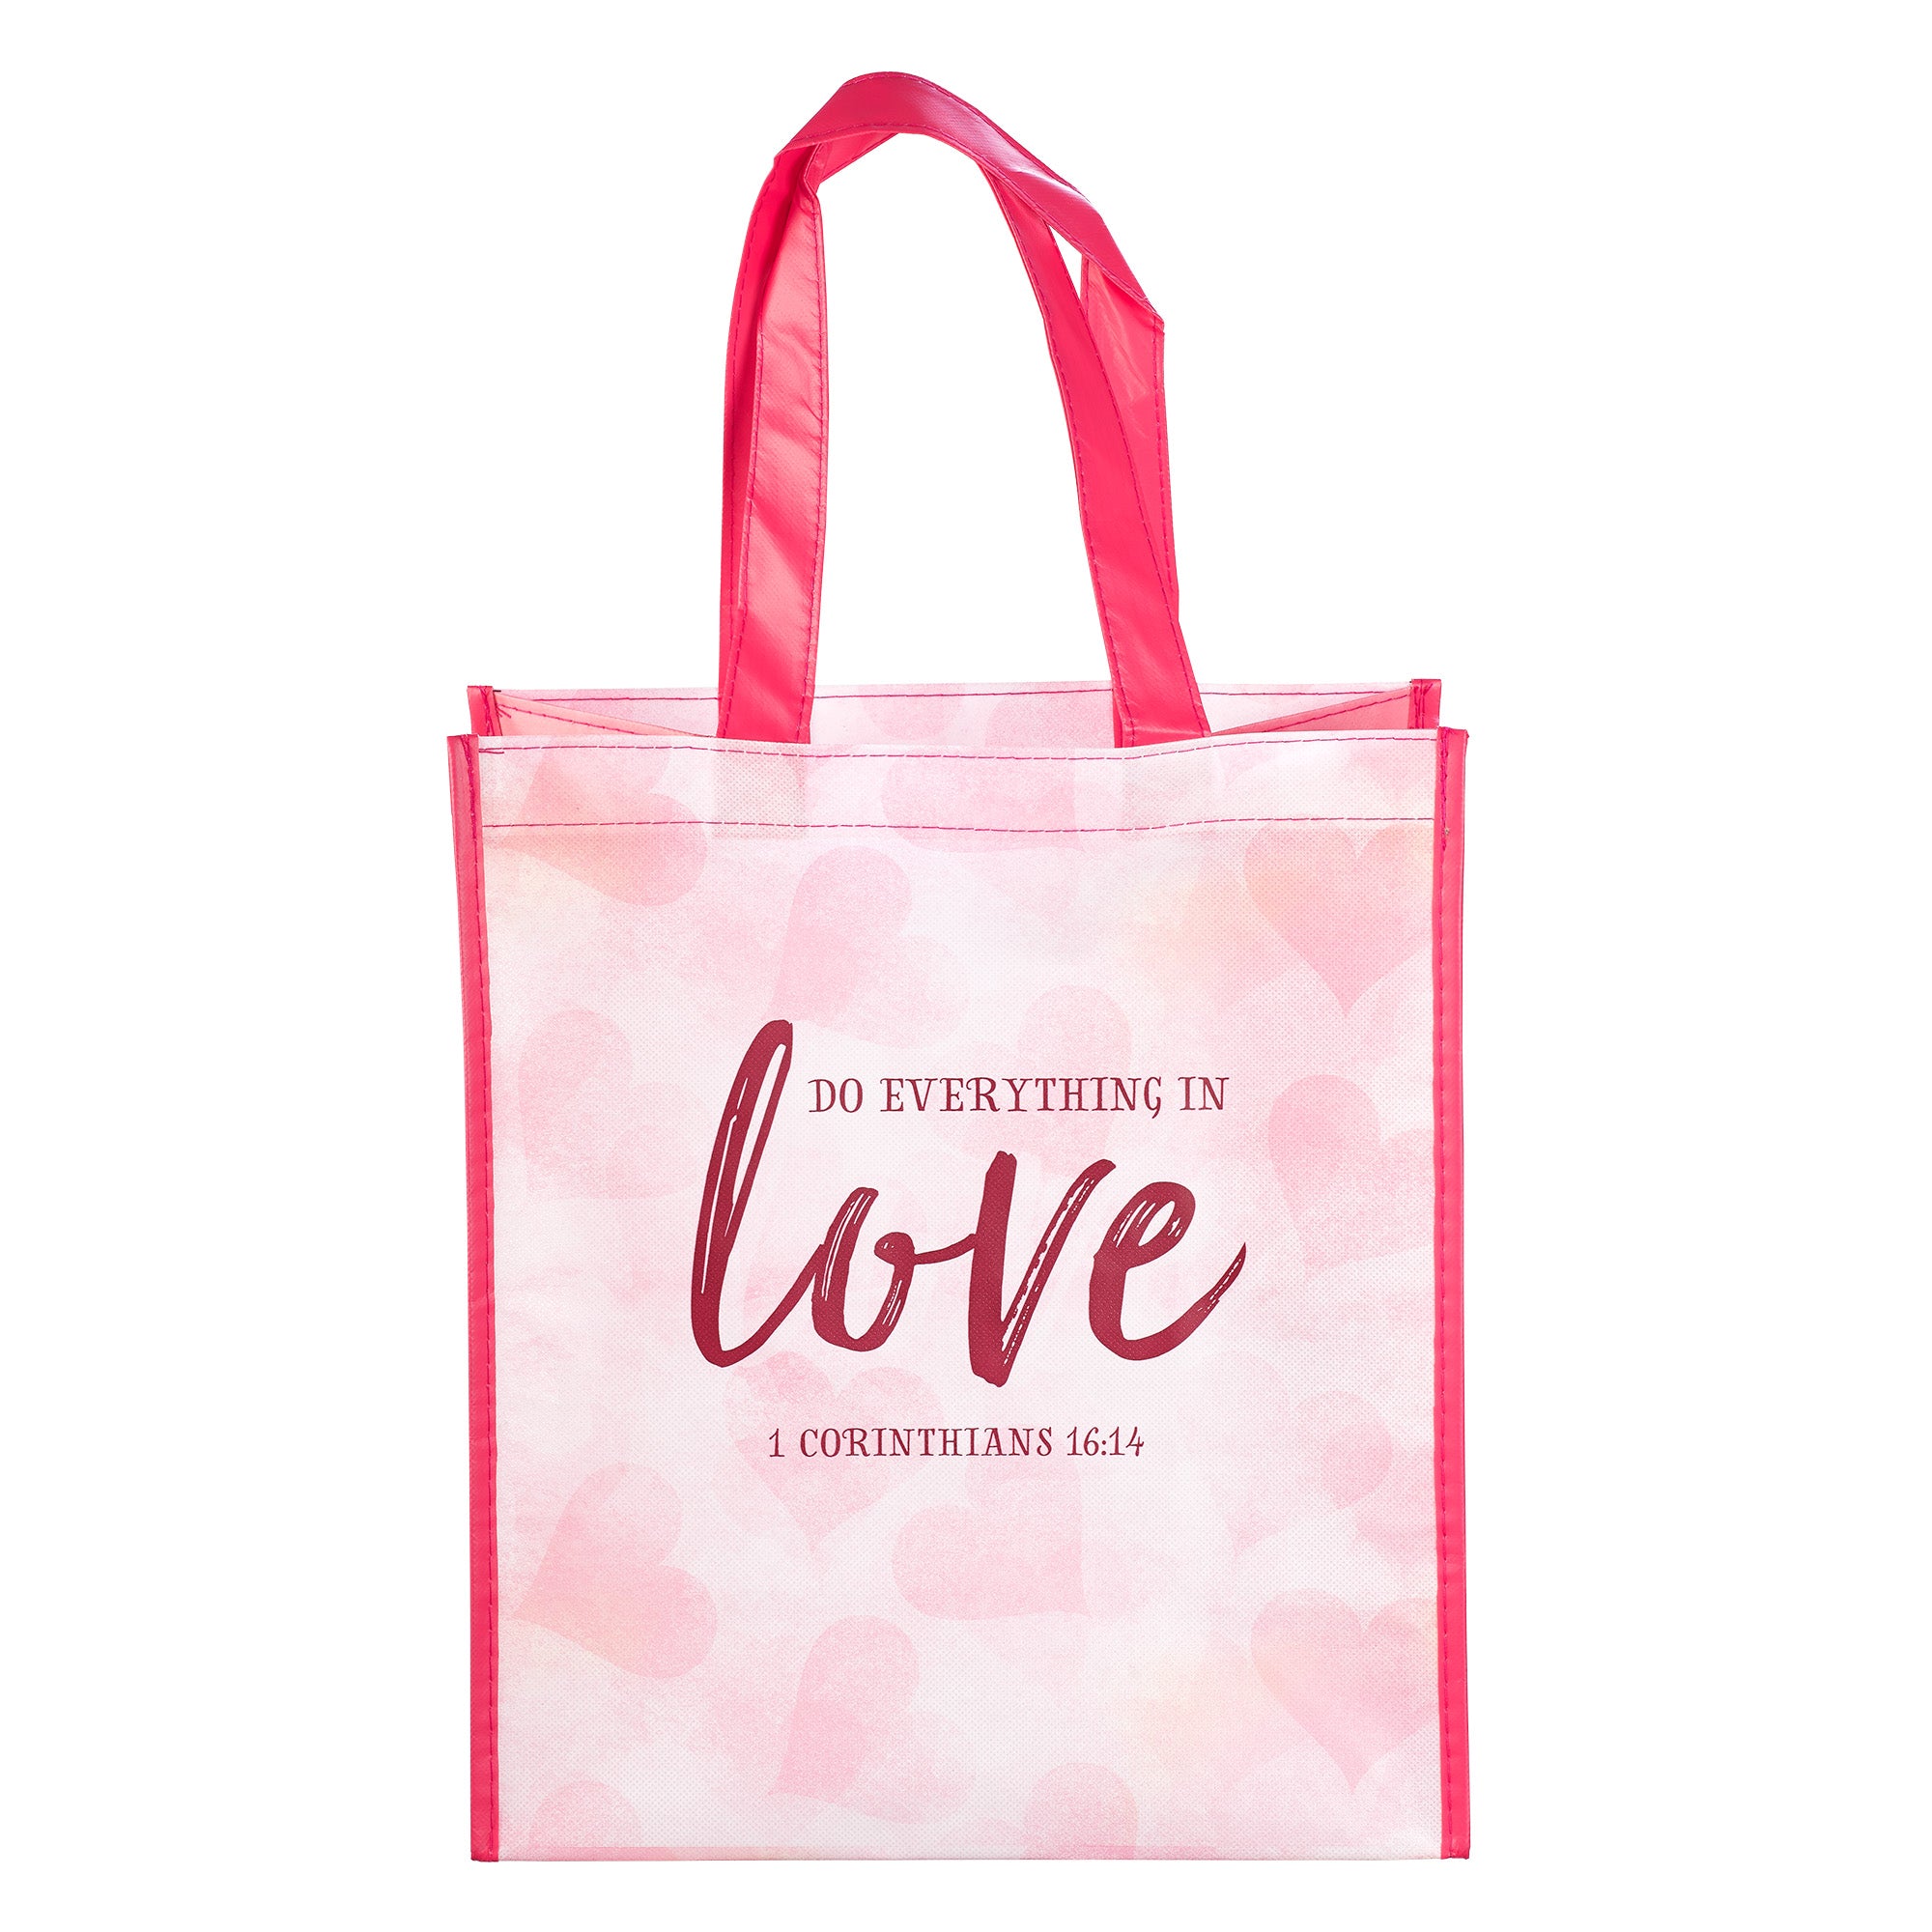 Image of Do Everything in Love Shopping Bag - 1 Corinthians 16:14 other